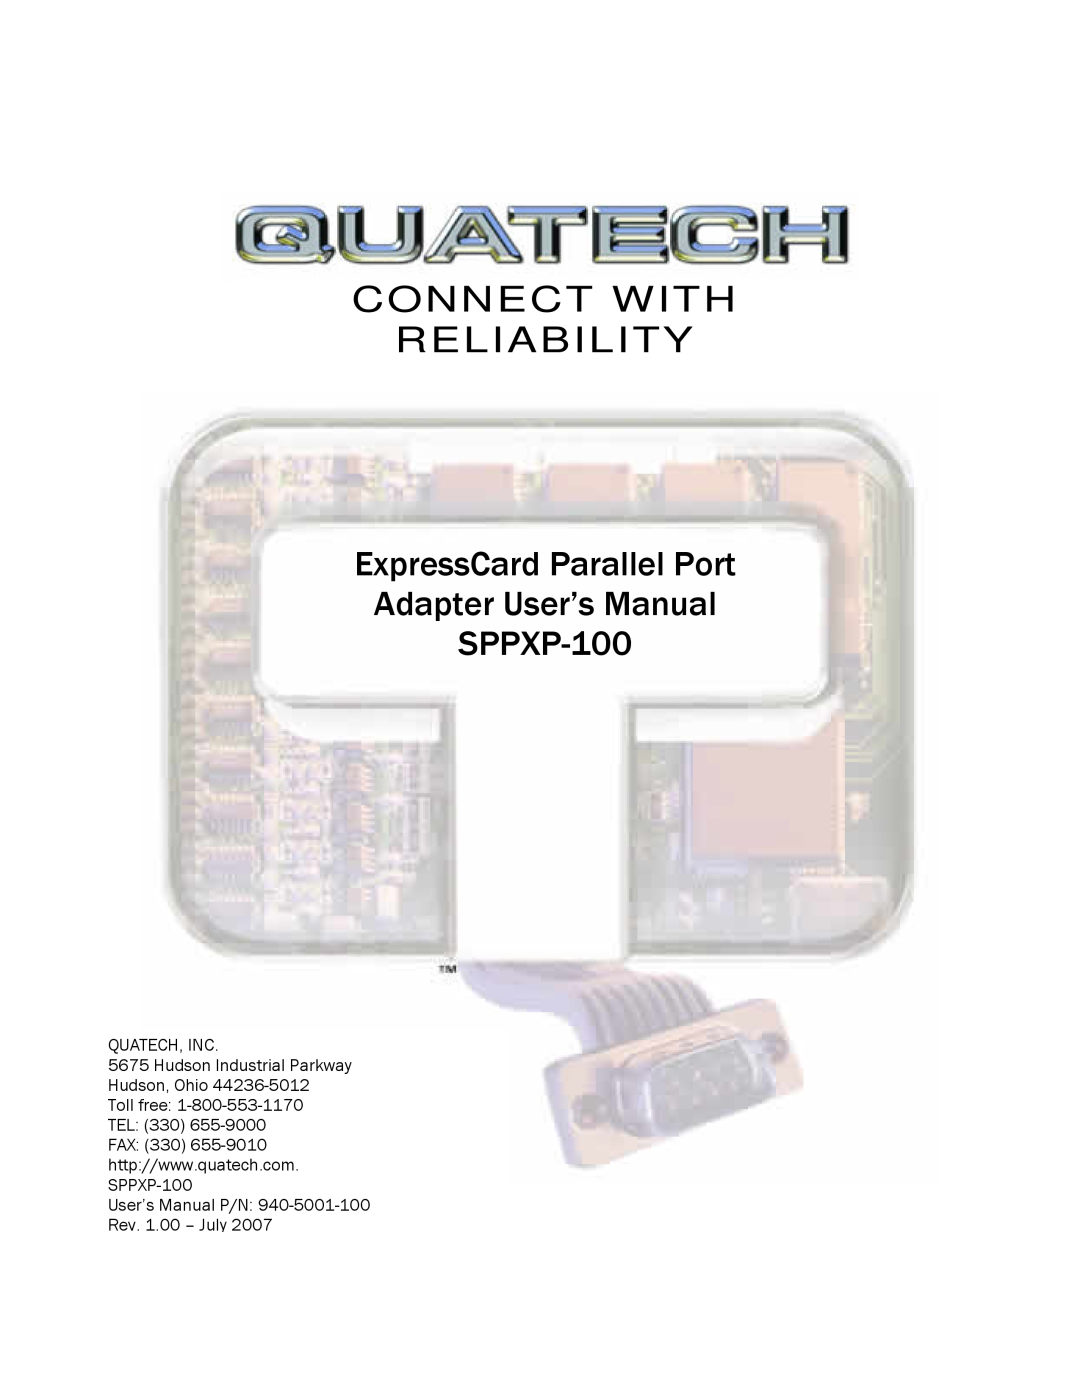 Quatech SPPXP-100 user manual Quatech, Inc, User’s Manual P/N 940-5001-100 Rev. 1.00 - July, Connect With Reliability 